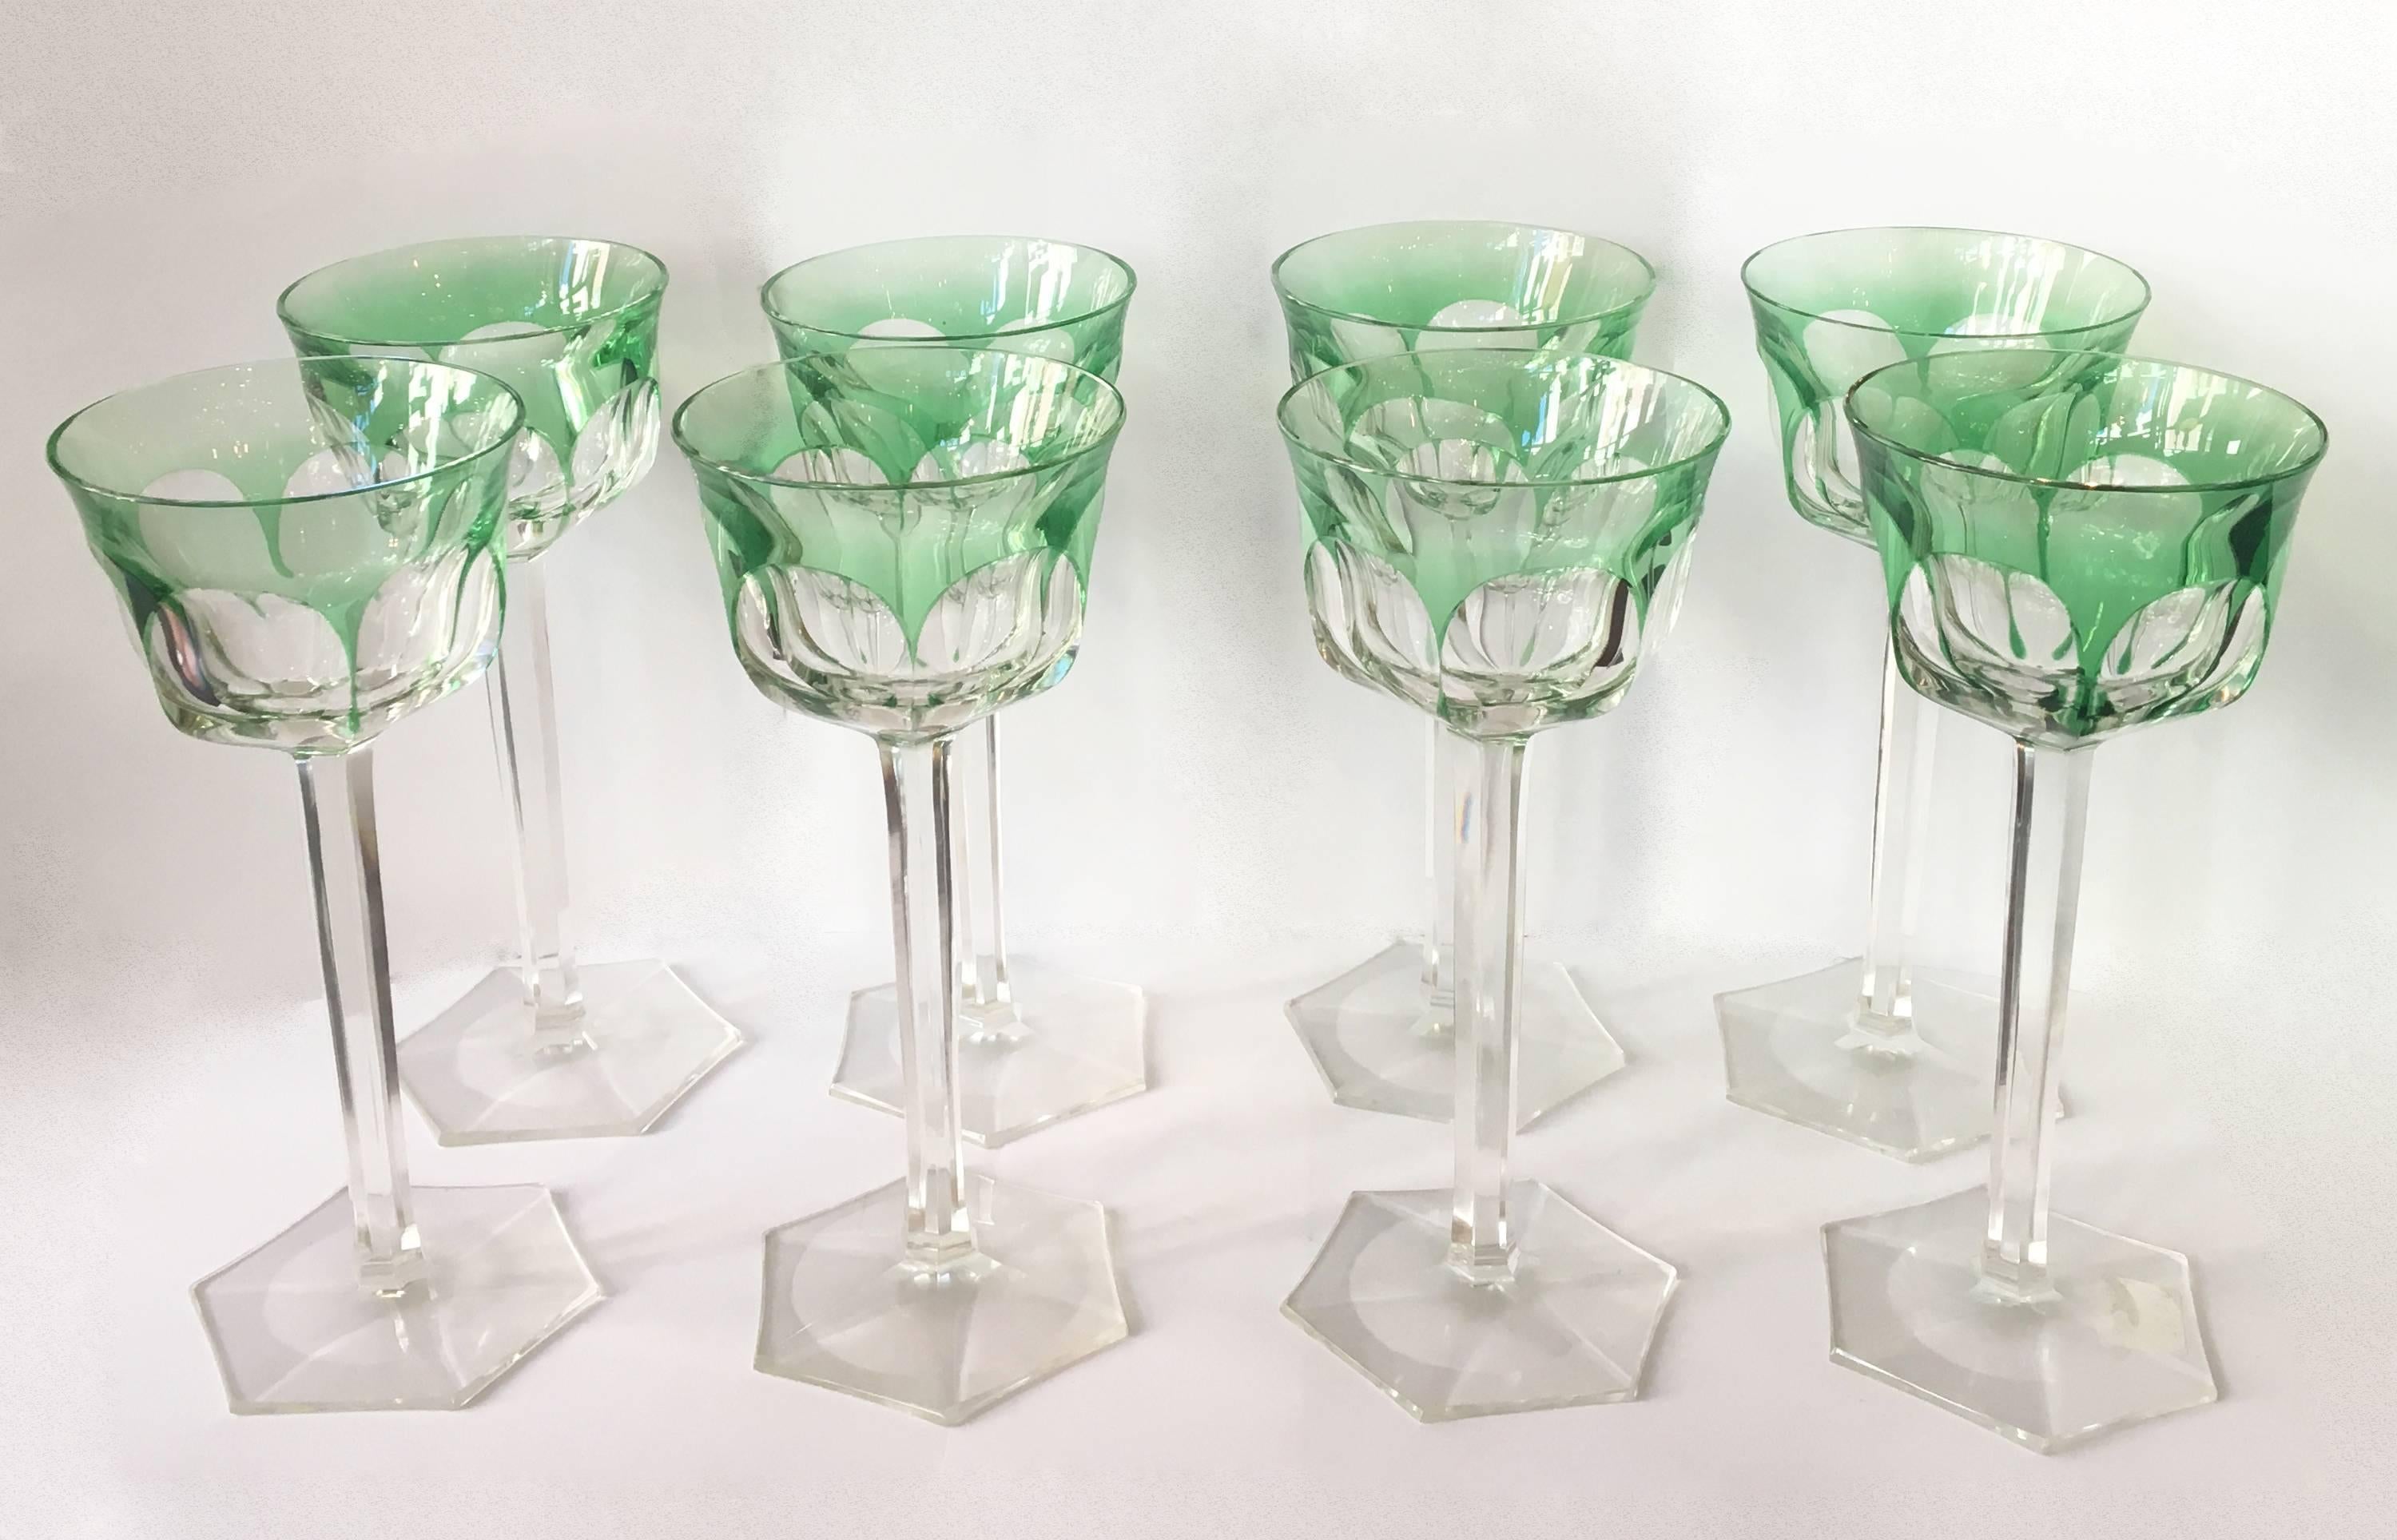 Beautiful set of eight tall stemmed green wine glasses by Belgium glass maker Val Saint Lambert. The Osram pattern adds unique style and detail.